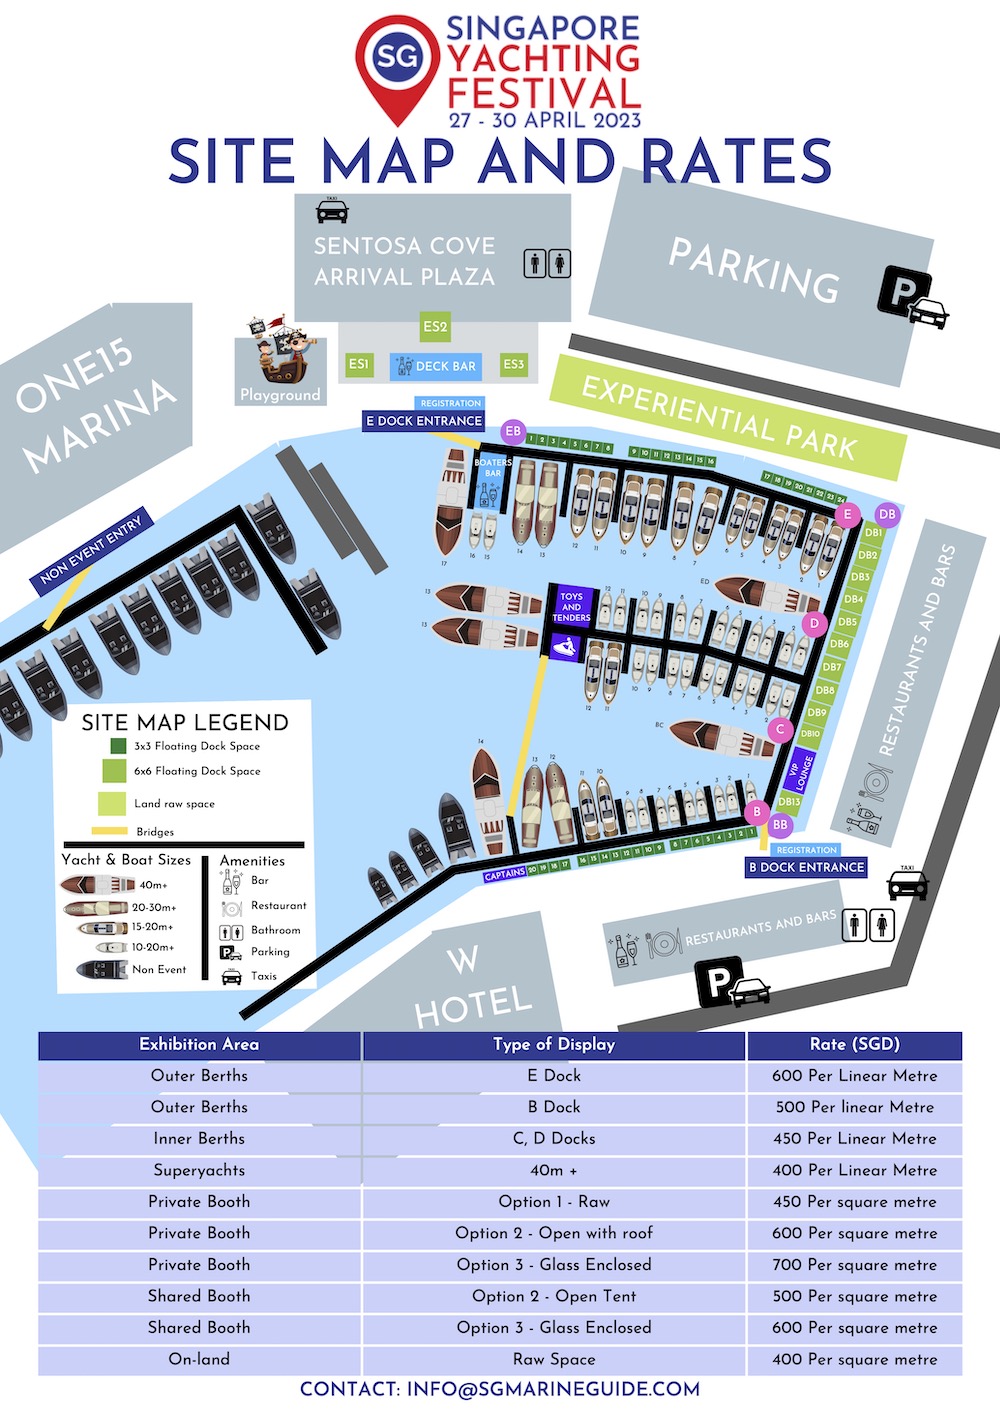 Singapore Yachting Festival Map and rate card